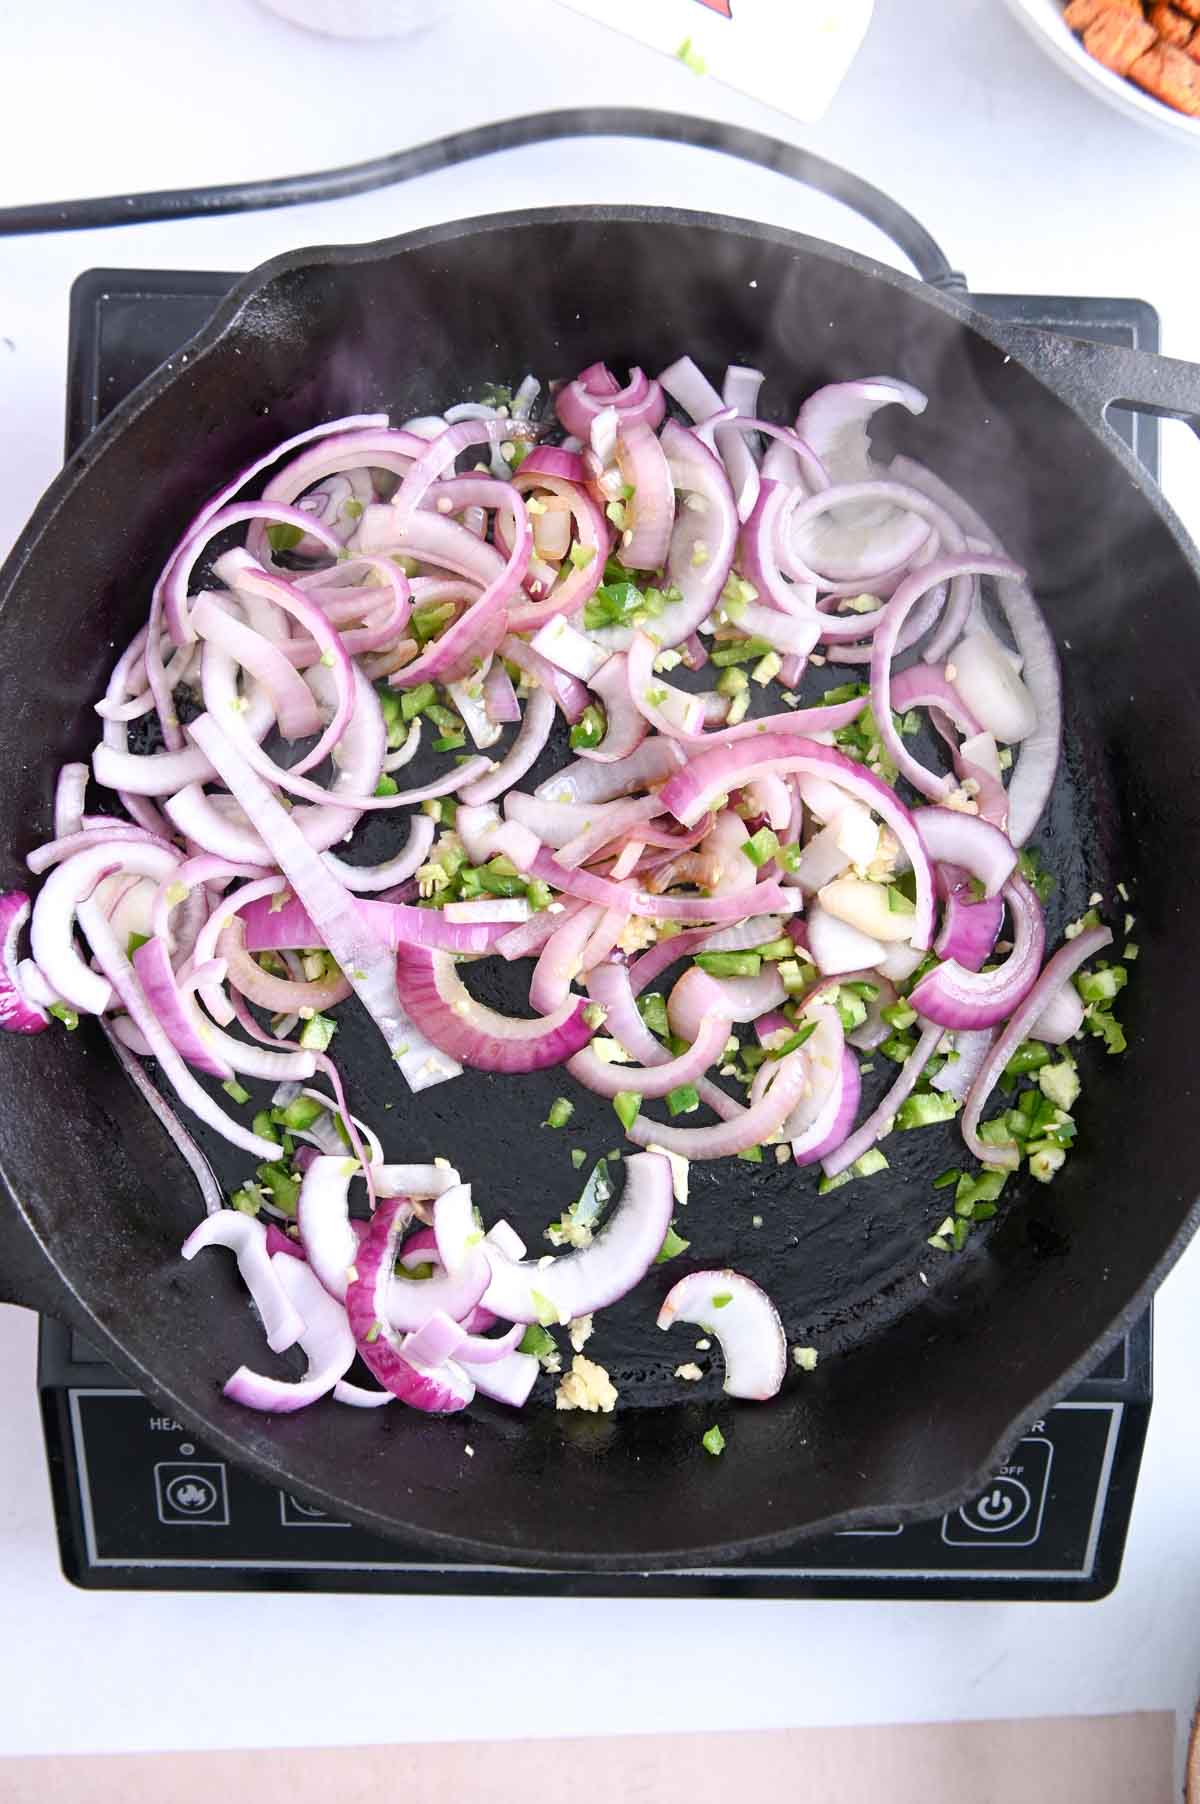 Sliced red onion and jalapeno in a cast iron skillet.